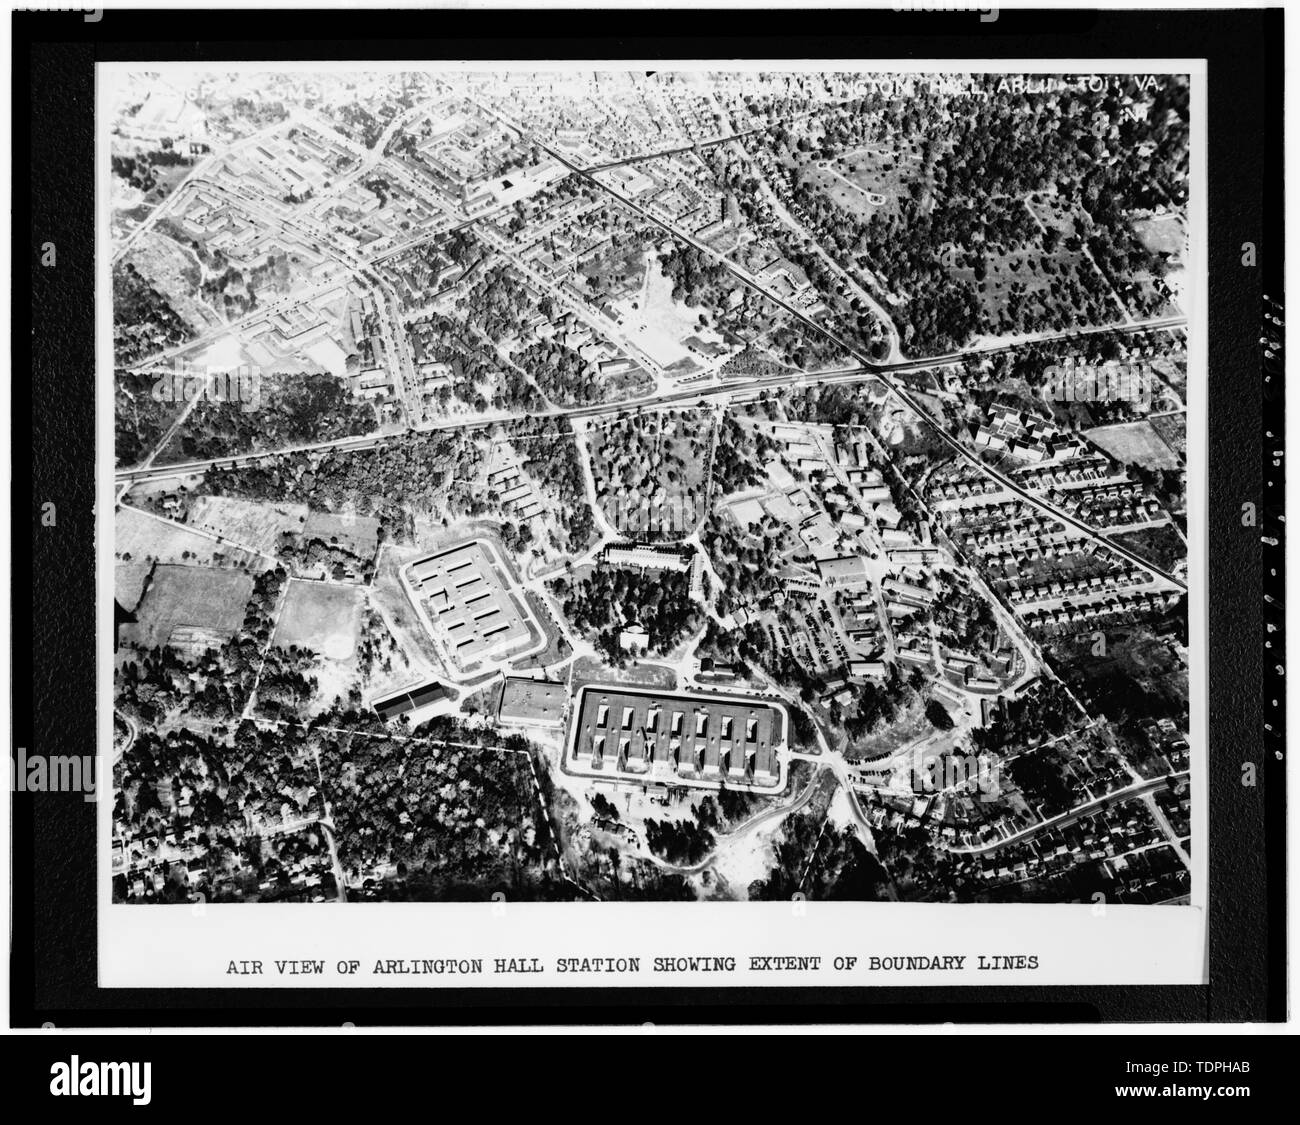 1945 (original print on file at U.S. Army Intelligence Security Command, Fort Belvoir, Virginia). AIR VIEW OF ARLINGTON HALL STATION SHOWING EXTENT OF BOUNDARY LINES. VIEW TO NORTH. - Arlington Hall Station, 4000 Arlington Boulevard, Arlington, Arlington County, VA; VanDyke, Tina, transmitter Stock Photo